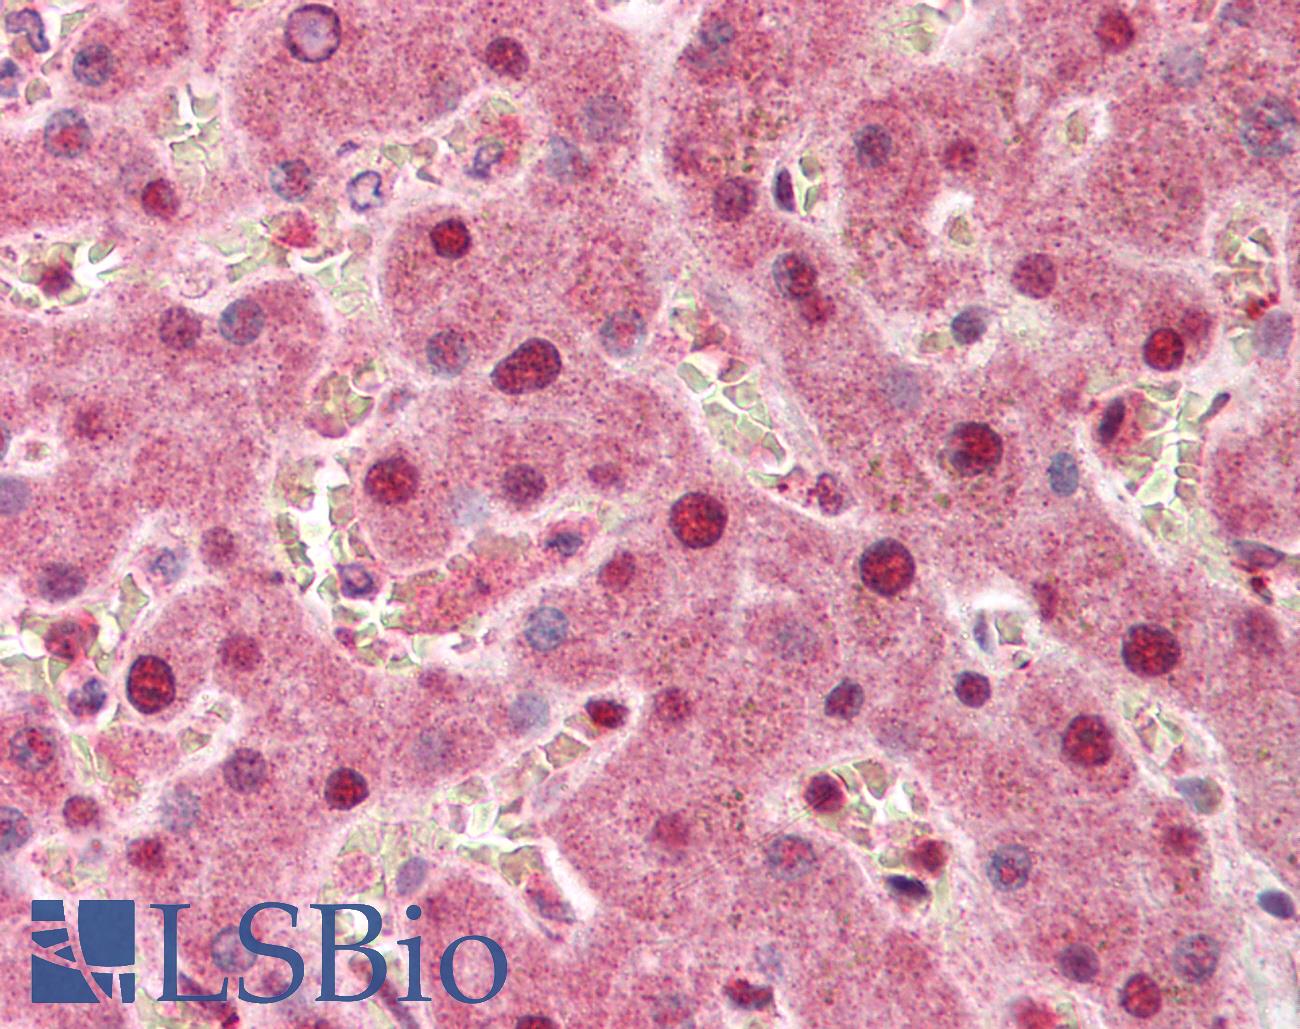 PPP1R13L / iASPP Antibody - Anti-PPP1R13L / IASPP antibody IHC of human liver. Immunohistochemistry of formalin-fixed, paraffin-embedded tissue after heat-induced antigen retrieval. Antibody concentration 5 ug/ml.